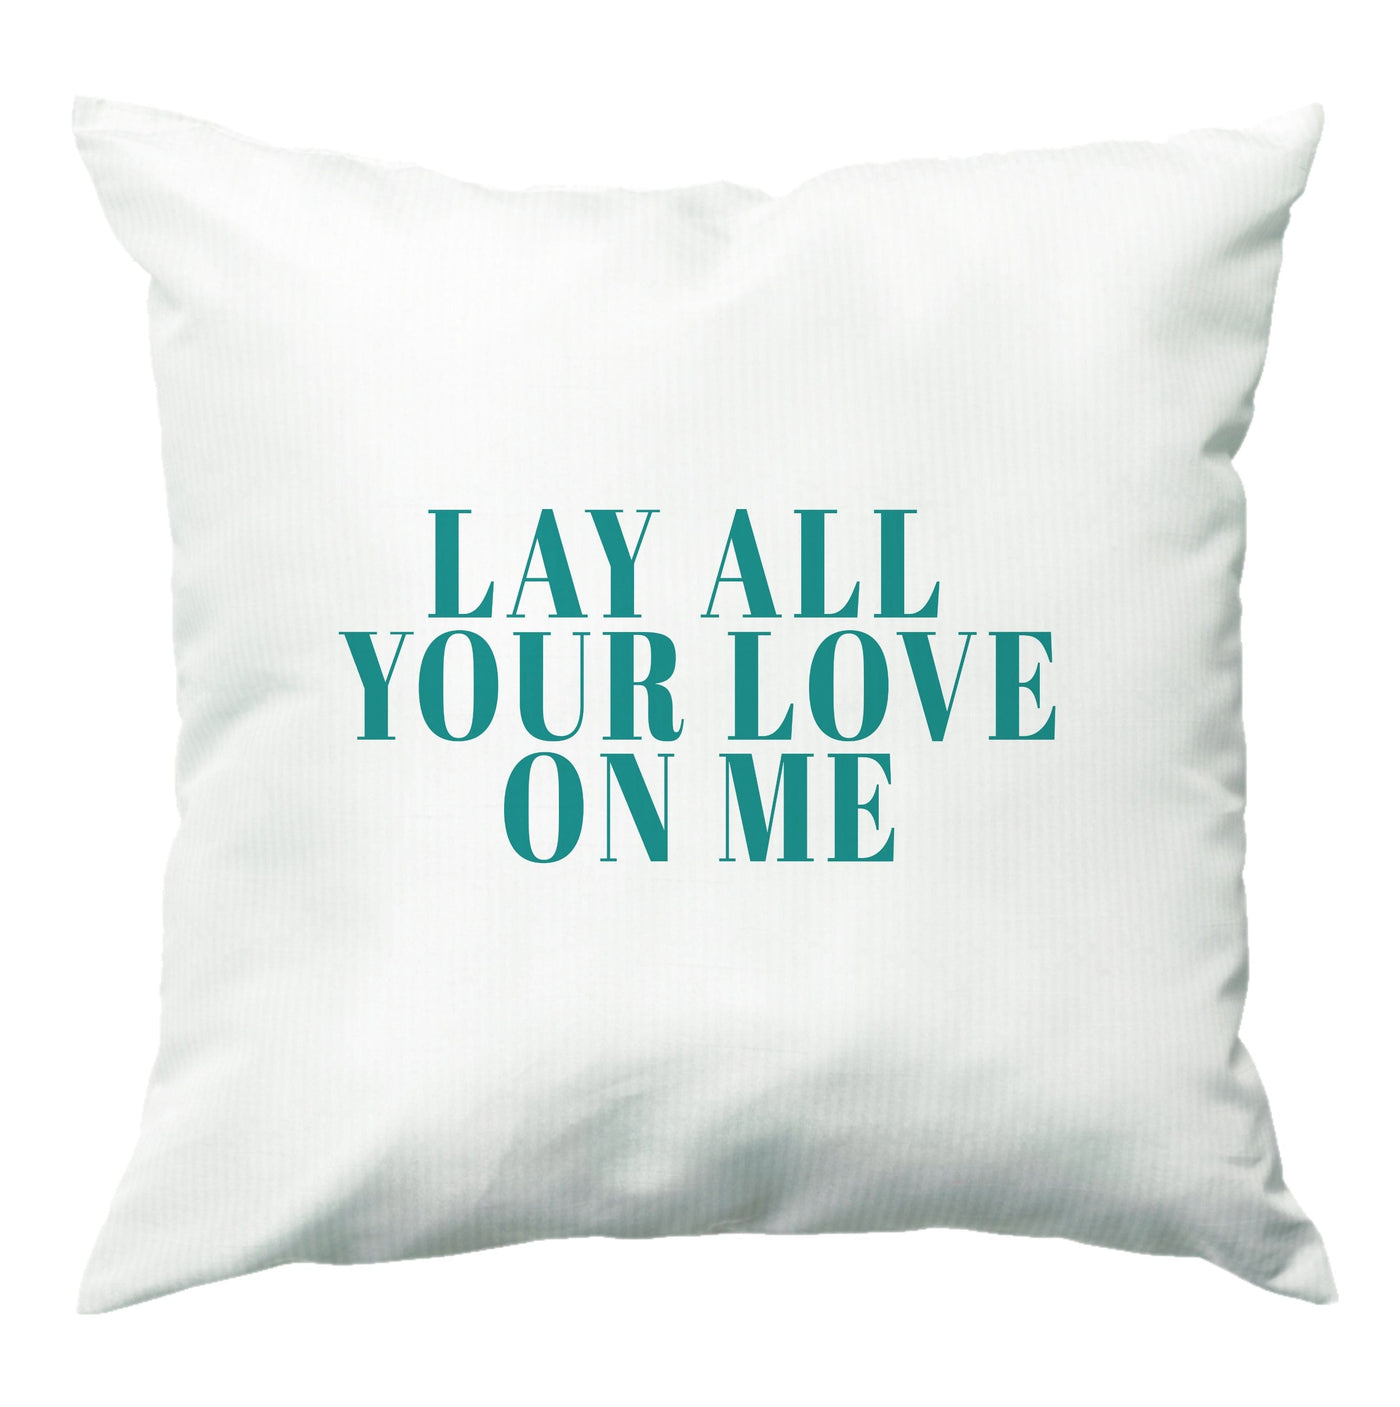 Lay All Your Love On Me - Mamma Mia Cushion